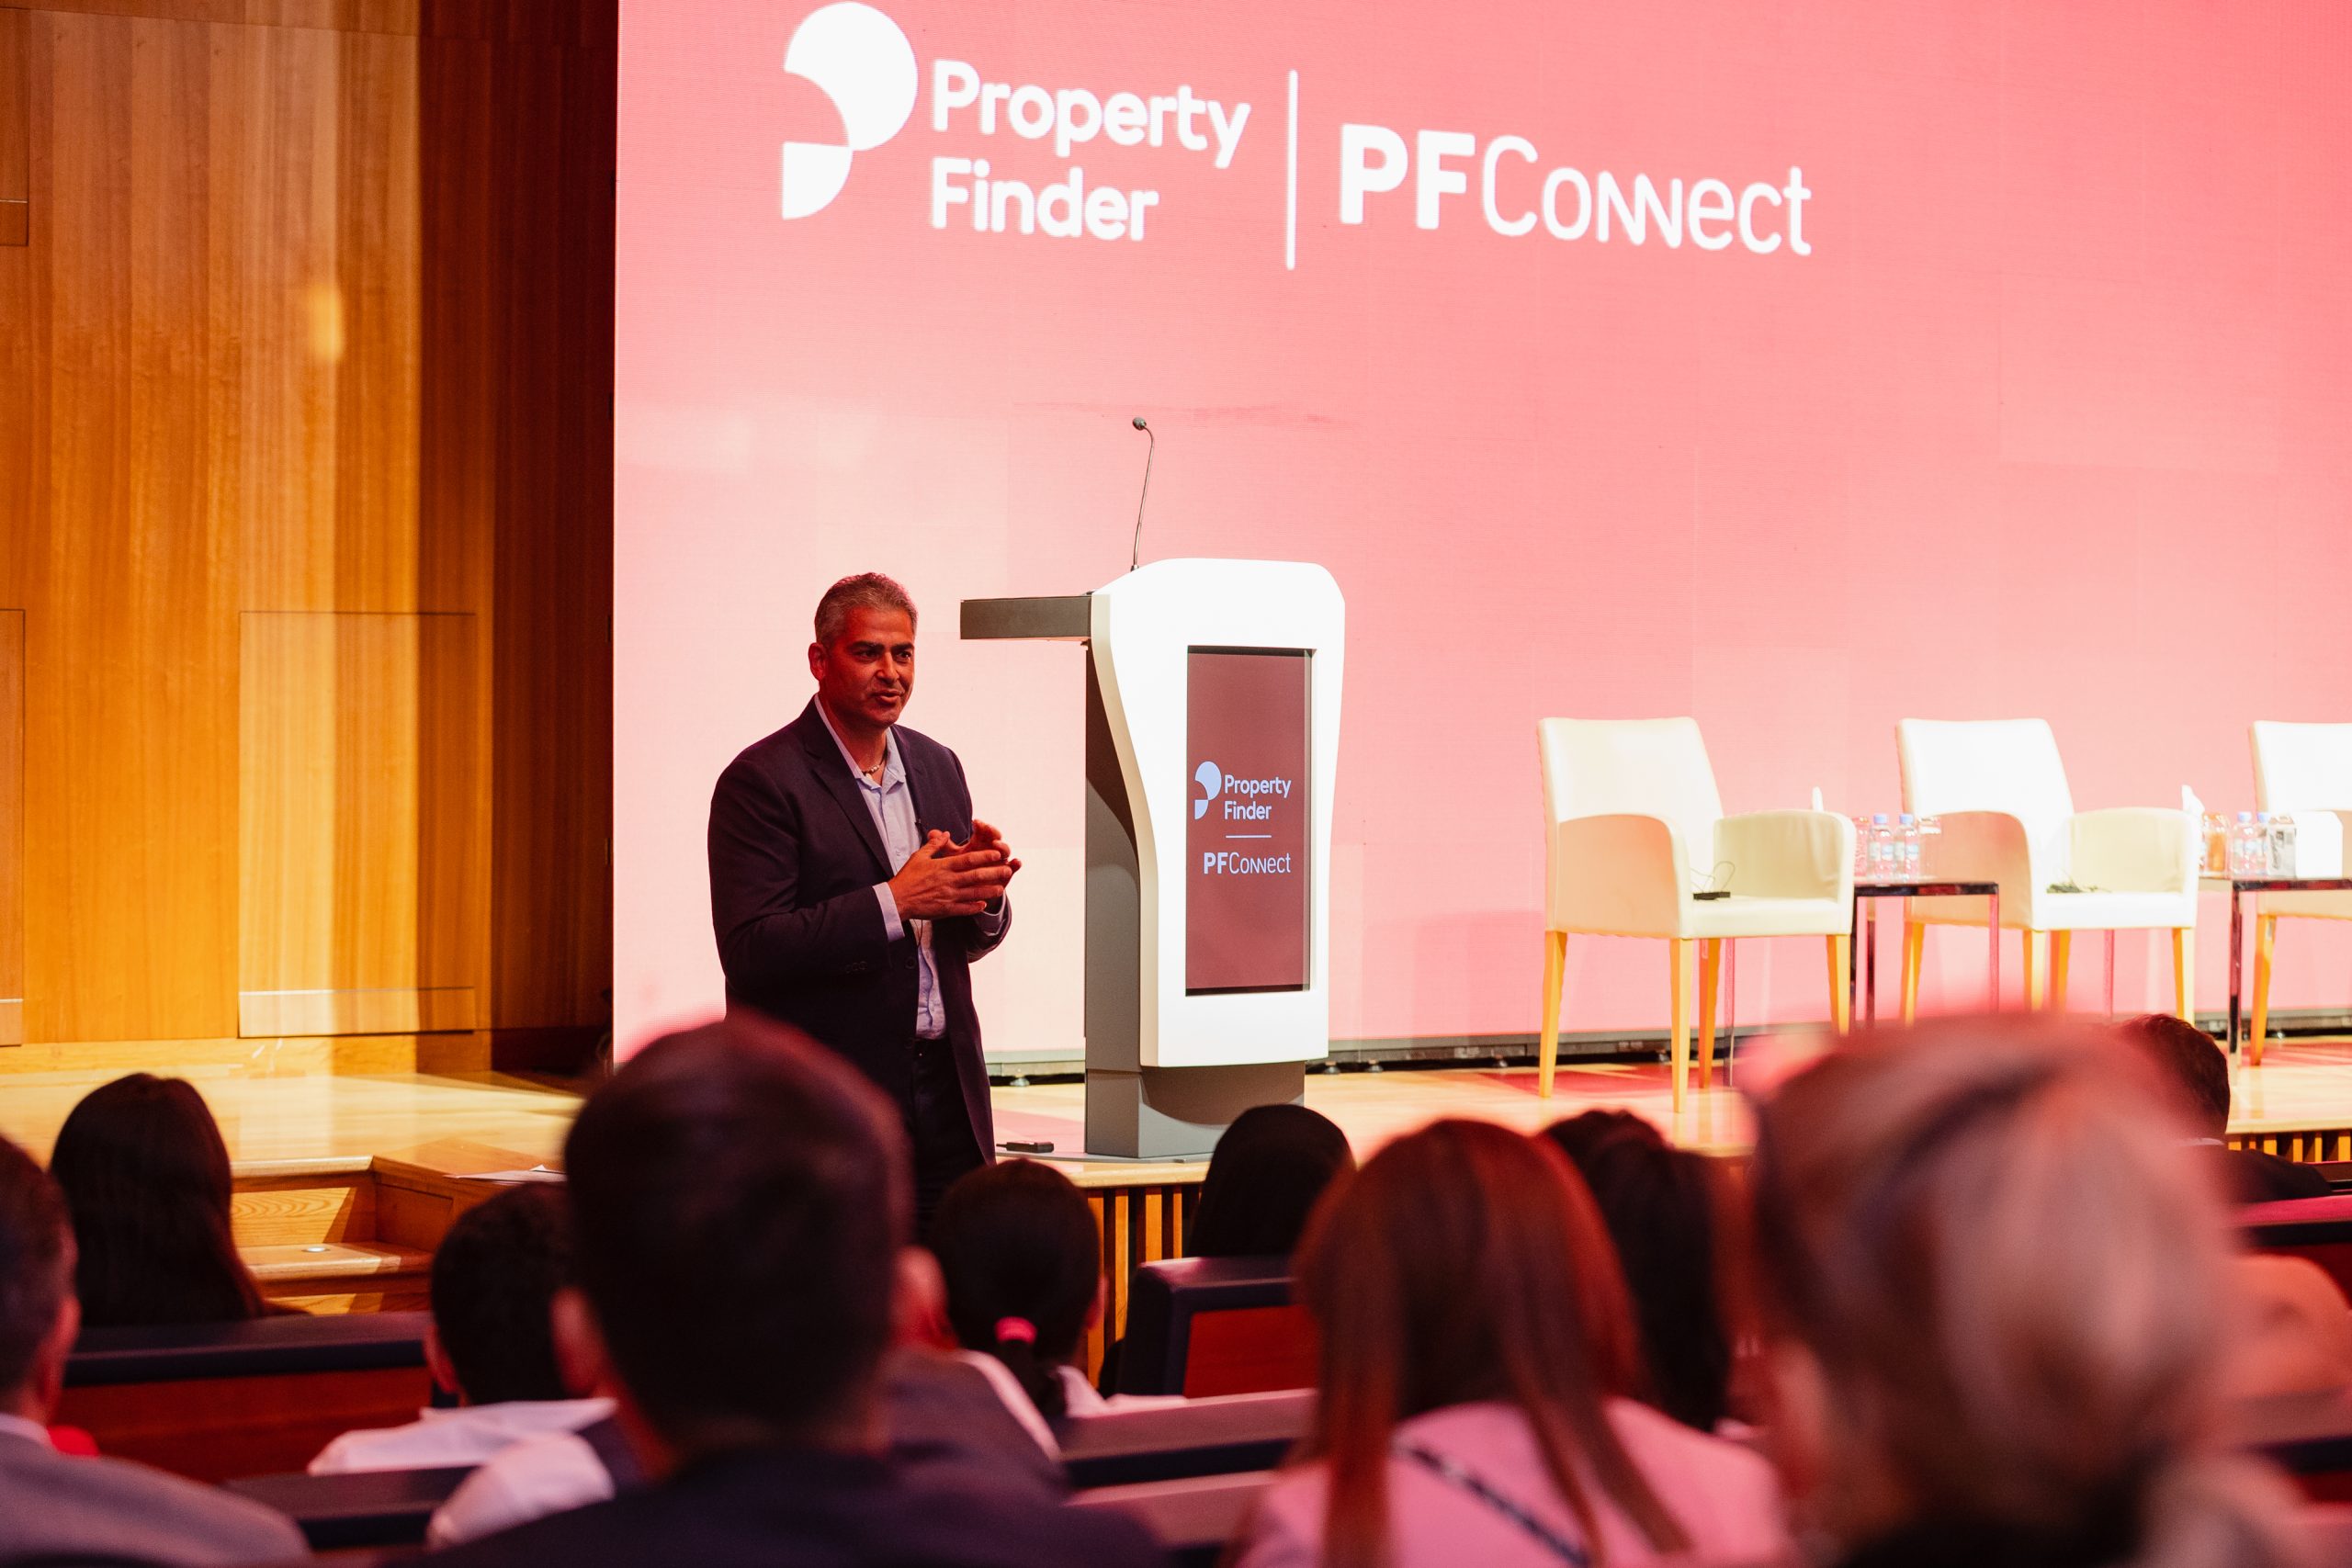 dohanews.co - Doha News Team - Property Finder brings together Qatar's real estate industry leaders at Property Finder Connect 2023